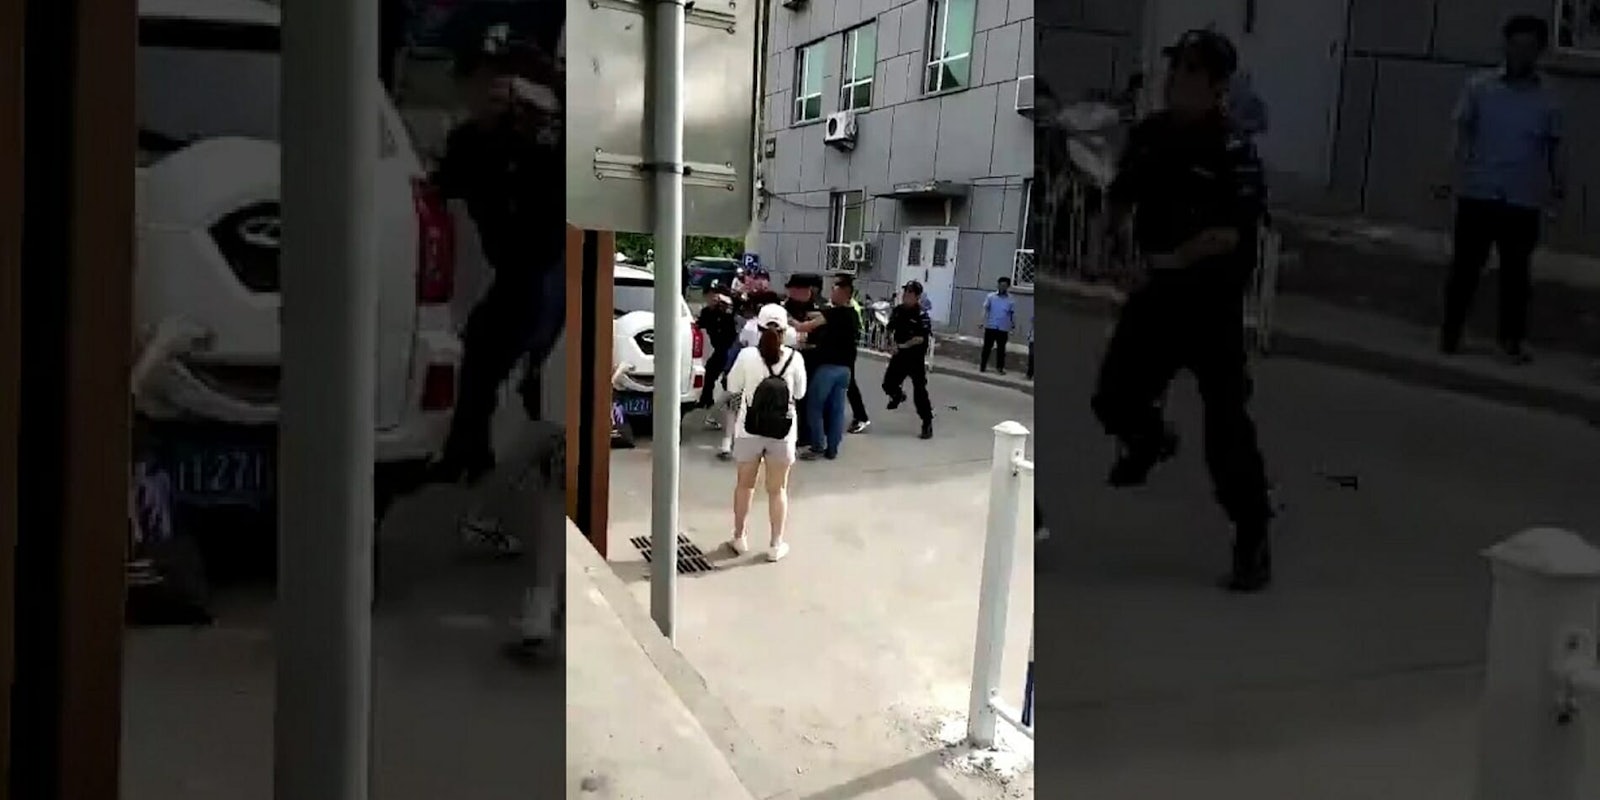 Two women wearing rainbow badges were reportedly beaten in Beijing by security guards.